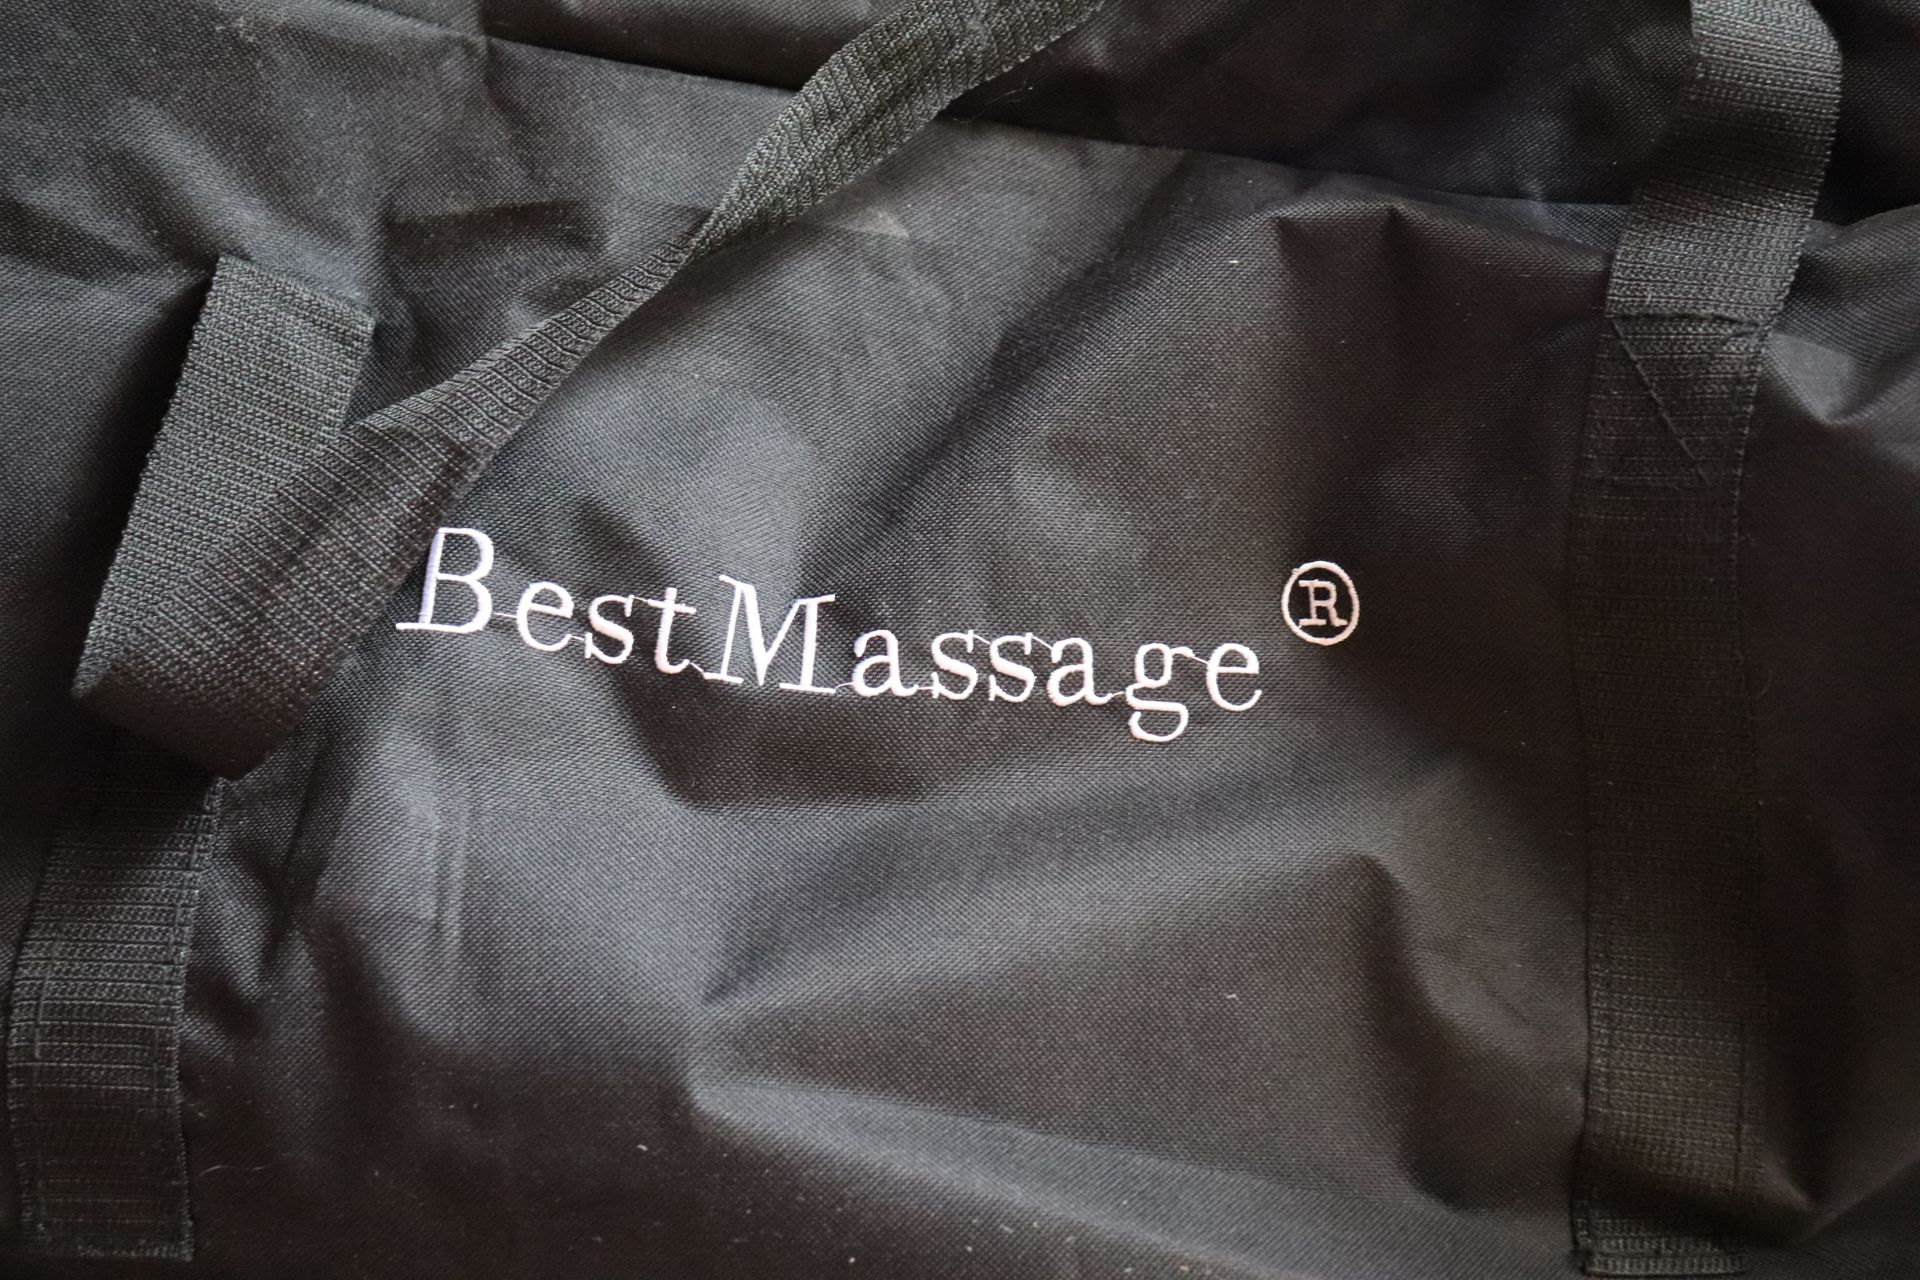 BestMassage portable message chair - Image 2 of 2